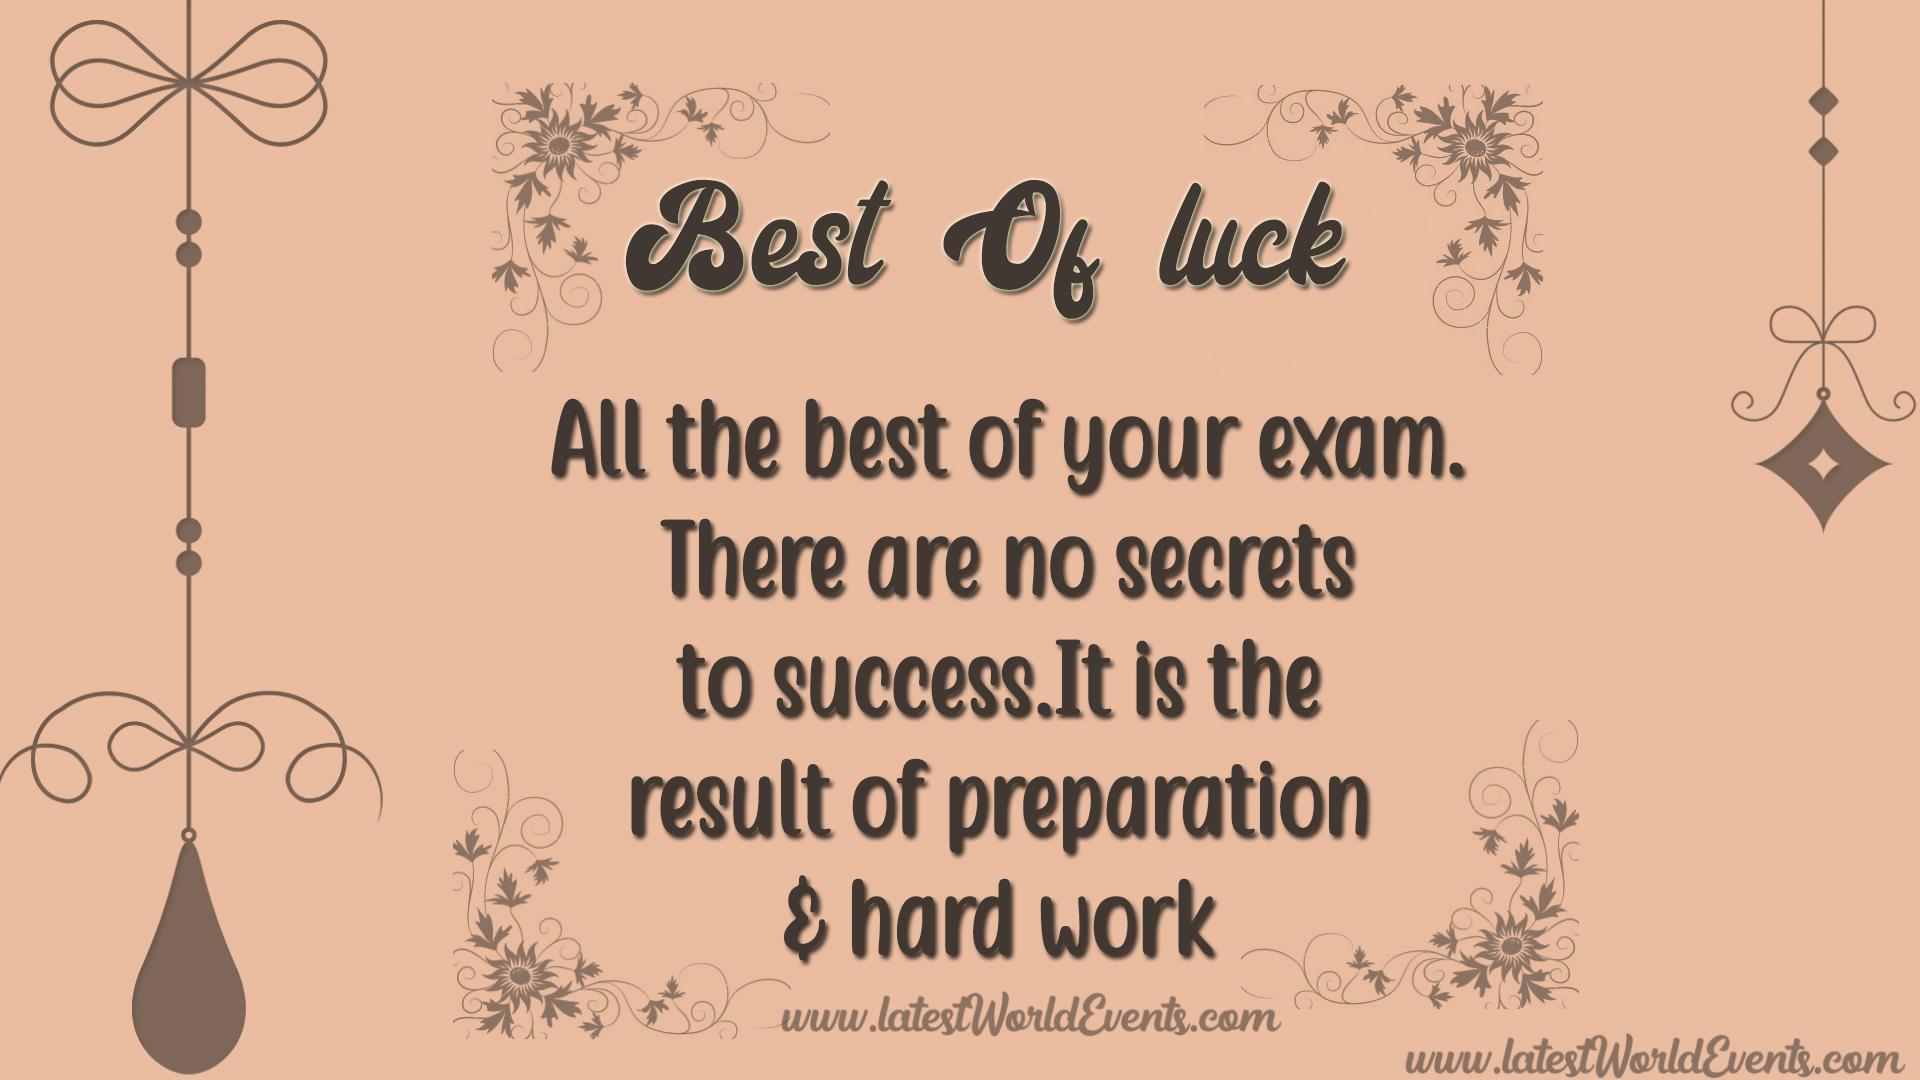 Best Wishes For Exams Preparation Messages - T Ara Bo Peep Bo - HD Wallpaper 